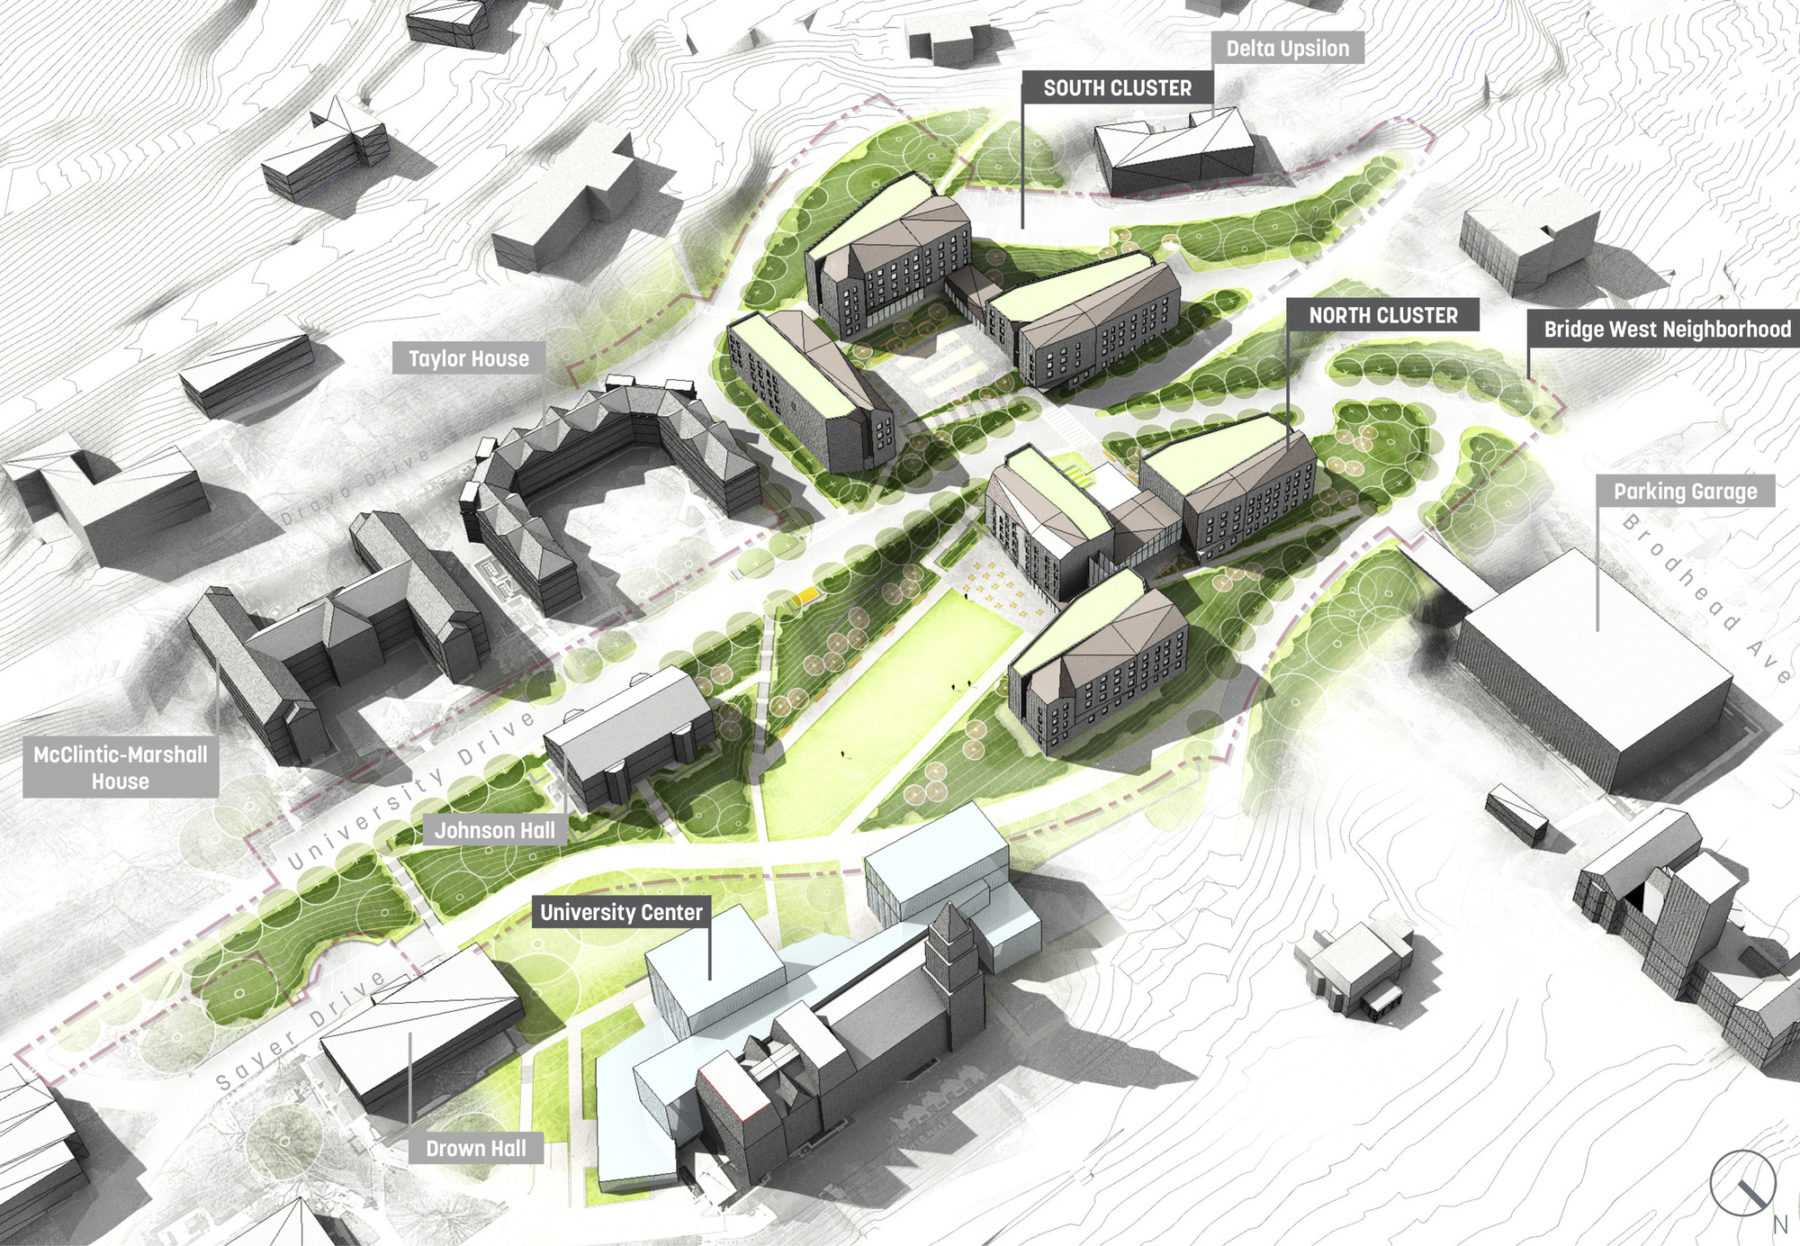 axon diagram of new campus neighborhood featuring new housing